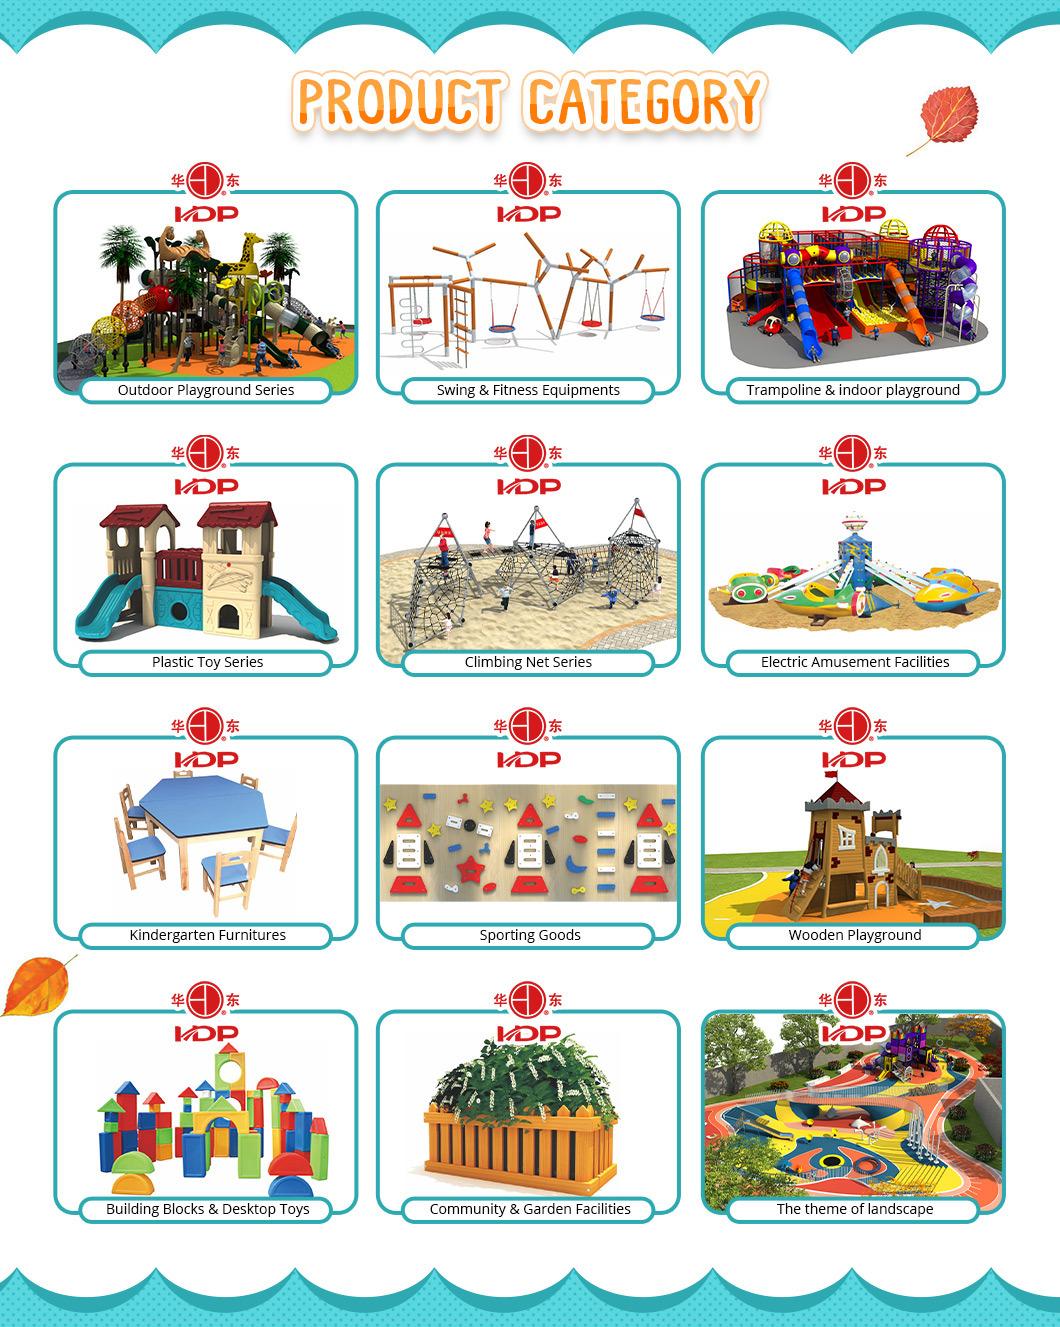 Hot Sale Amusement Park Used Outdoor Playground Equipment for Sale